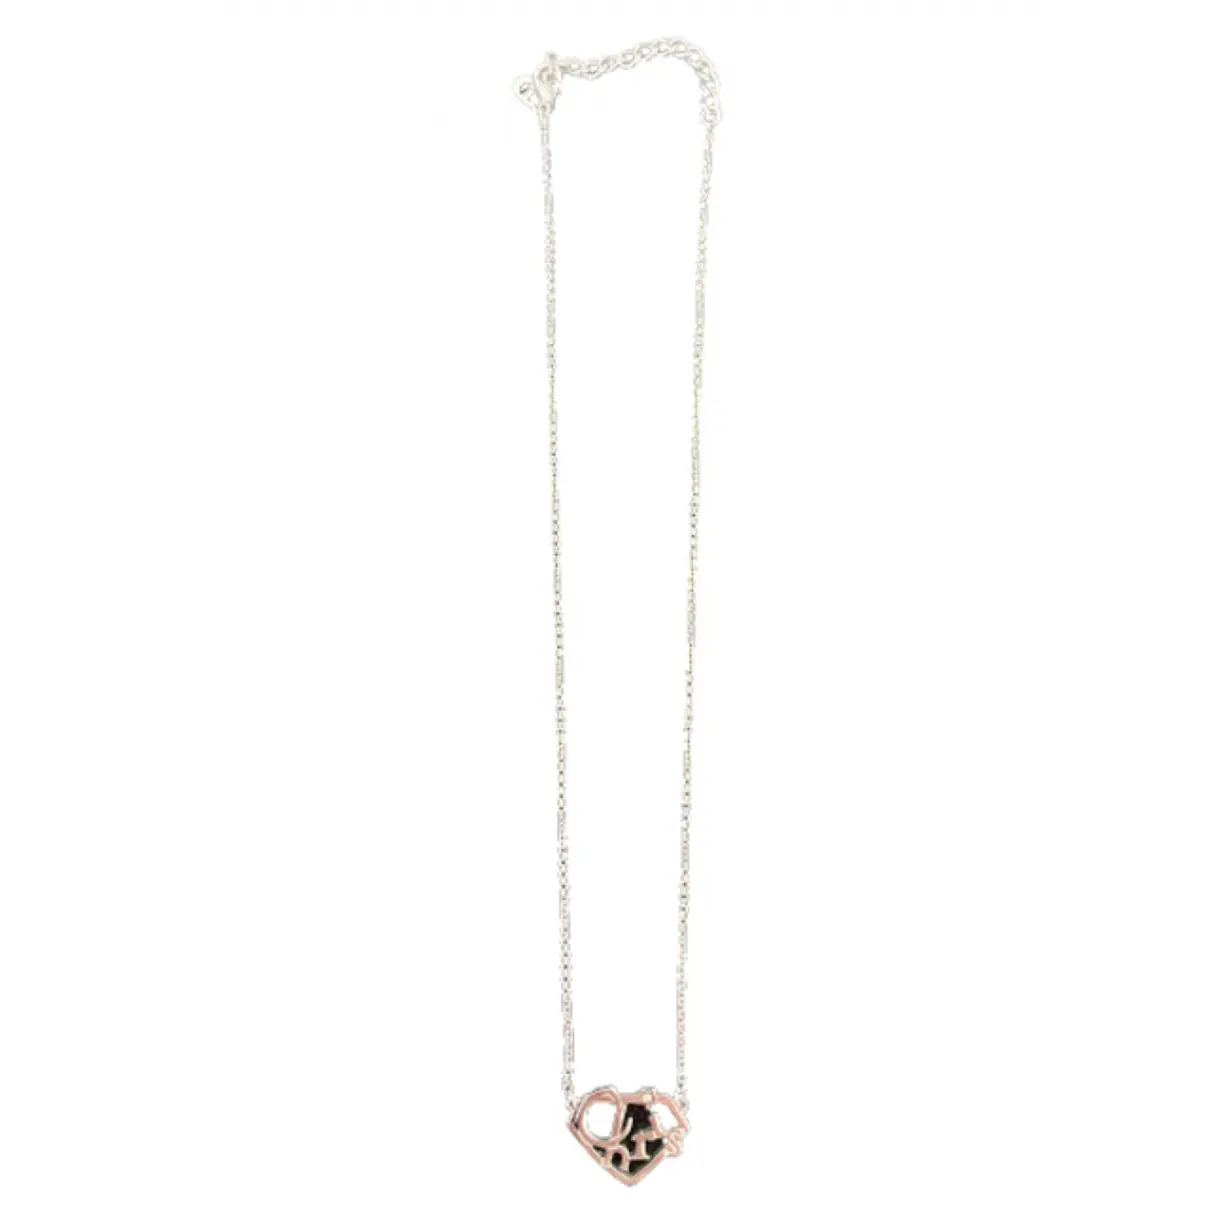 Buy Dior White gold necklace online